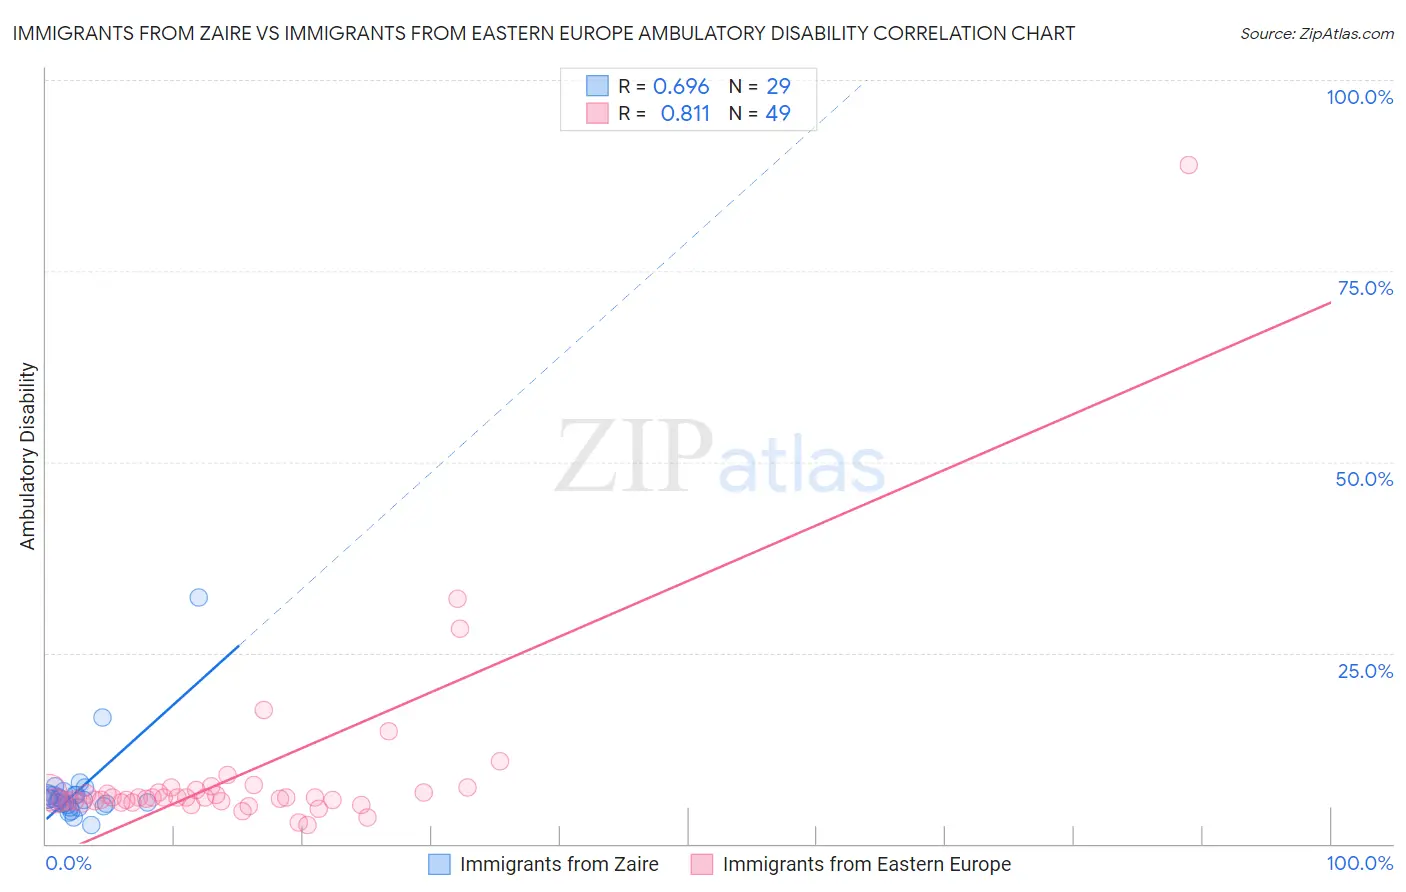 Immigrants from Zaire vs Immigrants from Eastern Europe Ambulatory Disability